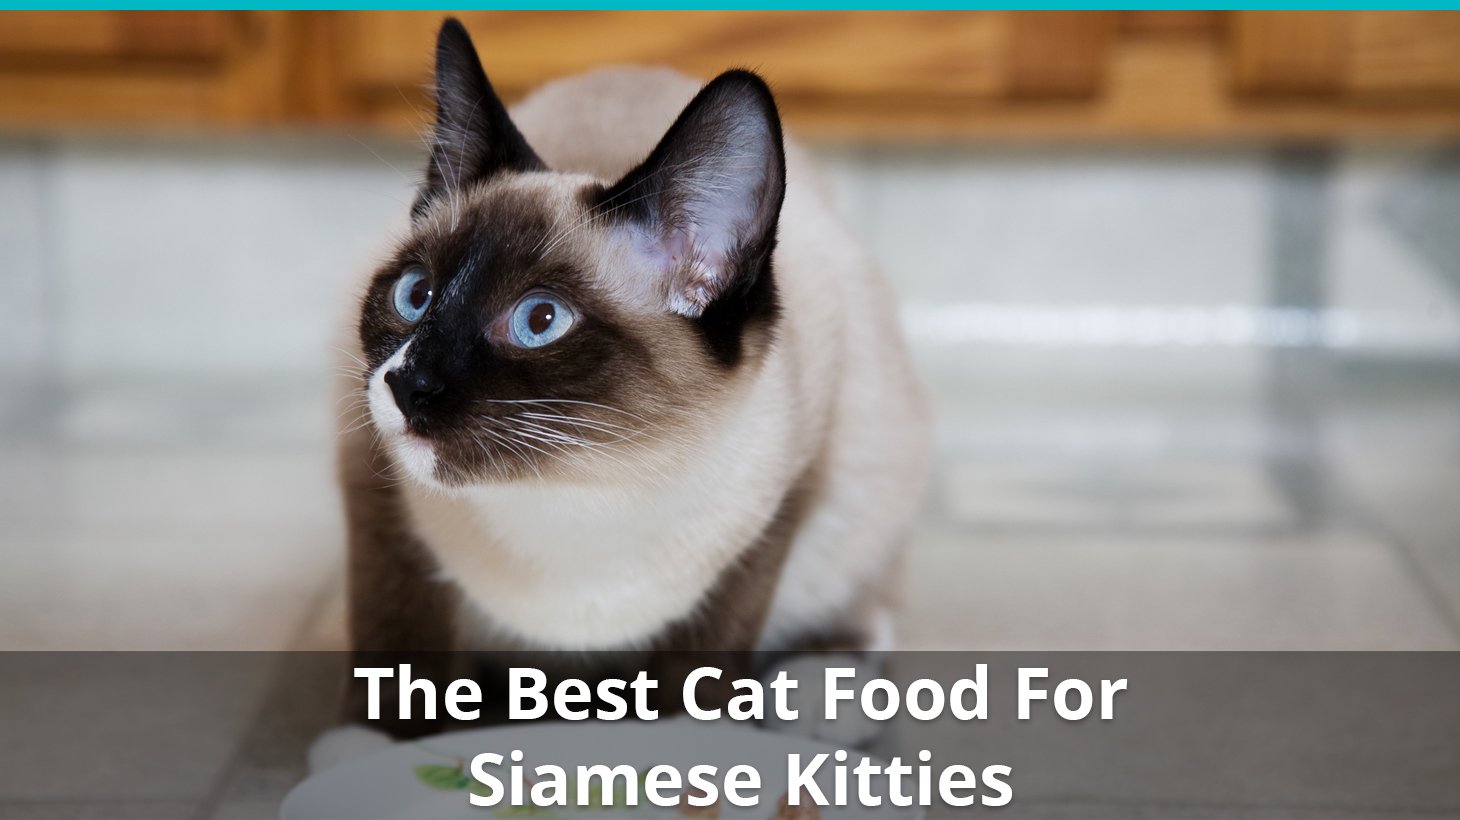 Reviews Of The Best Food Brands For Siamese Cats And Kittens In 2020